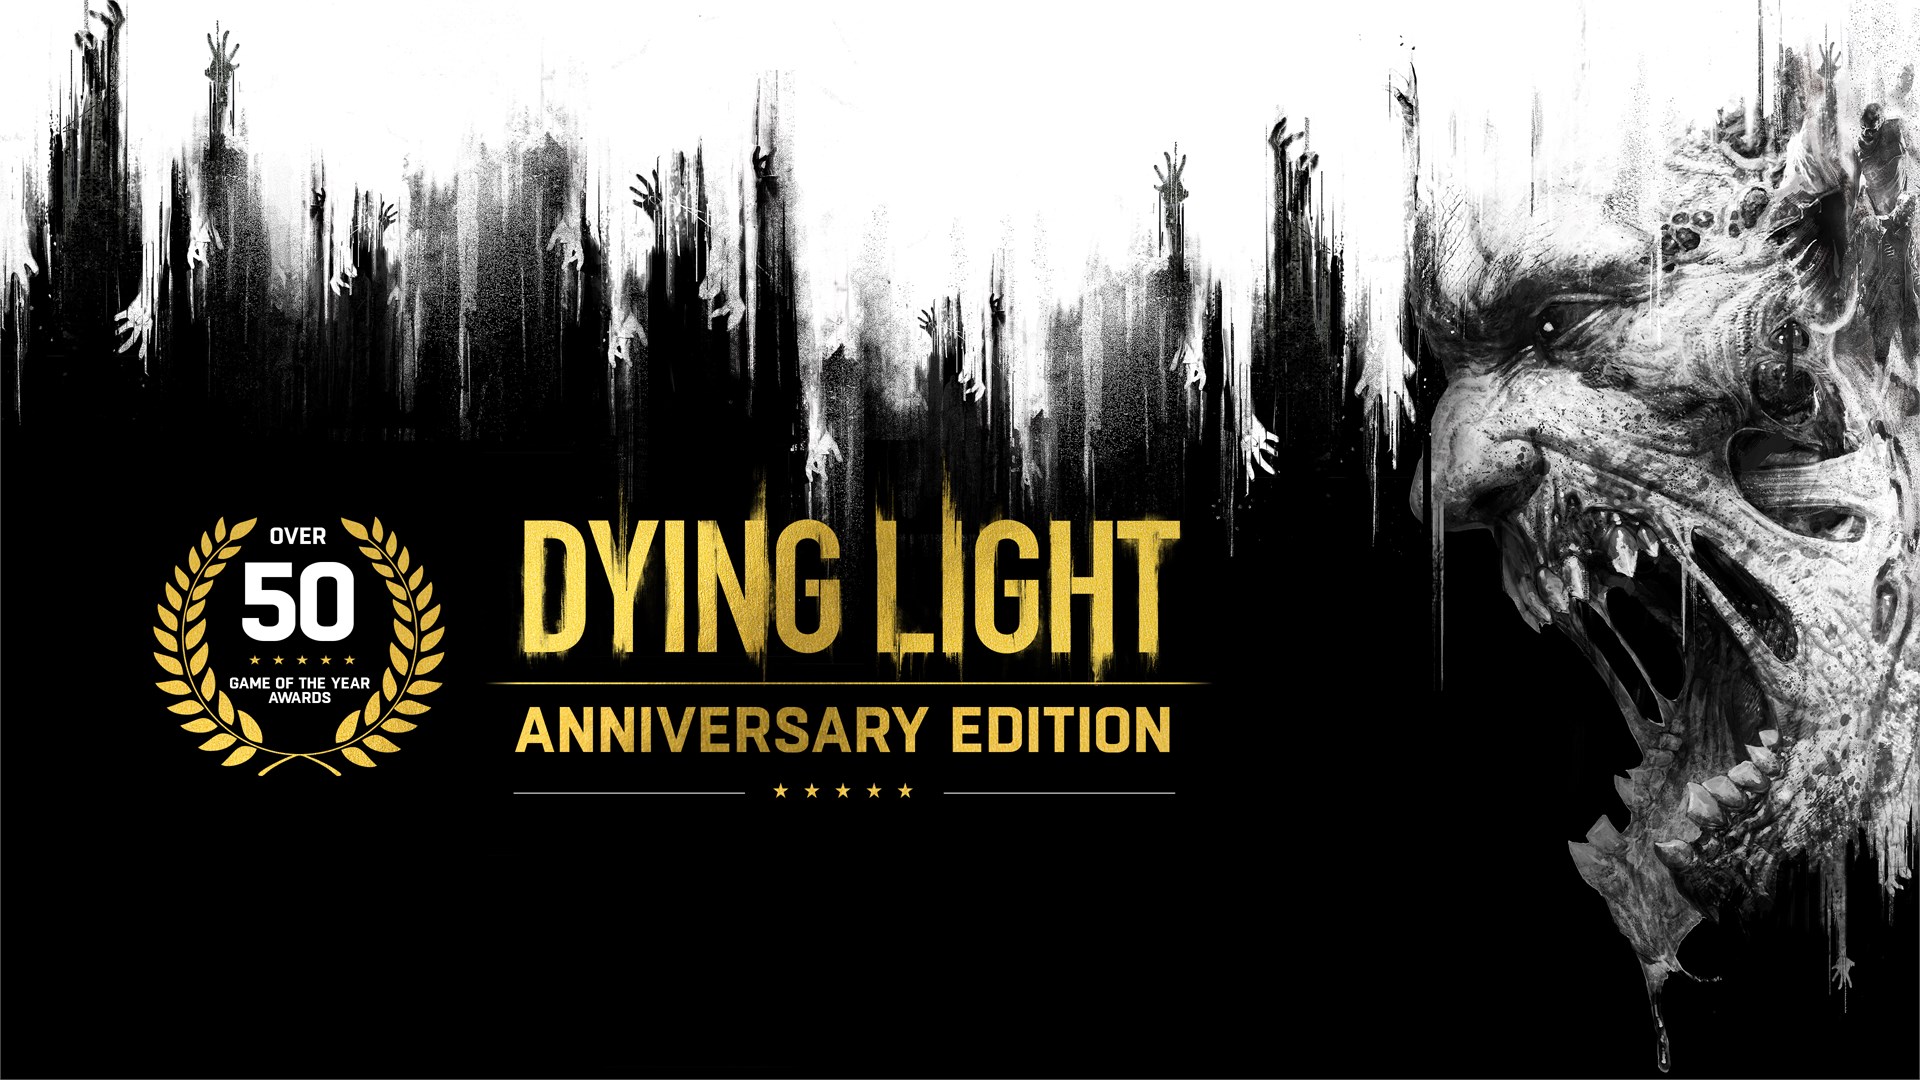 Dying Light Enhanced Edition | Download and Buy Today - Epic Games Store